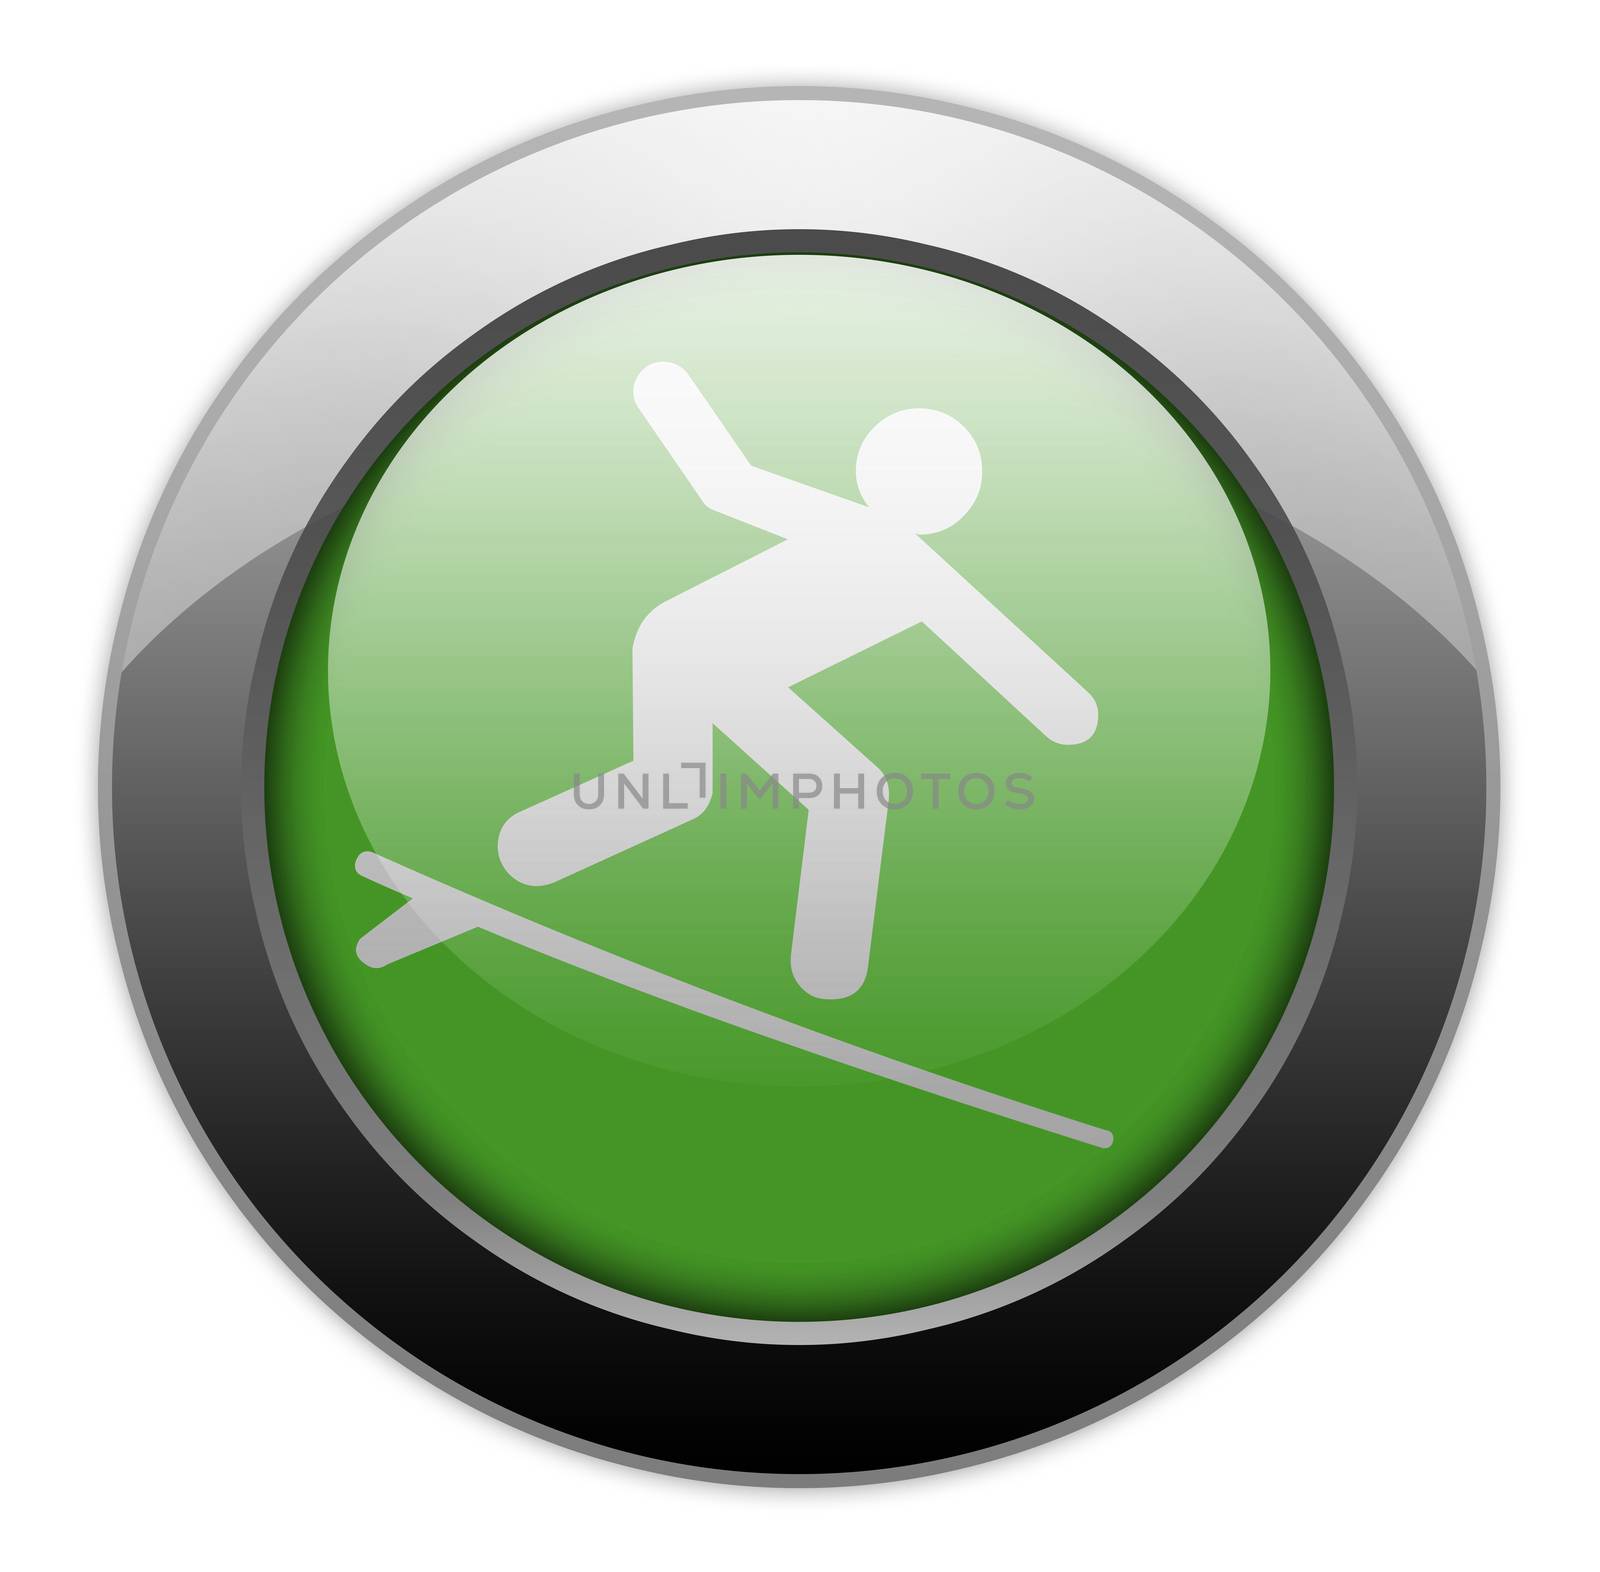 Icon, Button, Pictogram Surfing by mindscanner